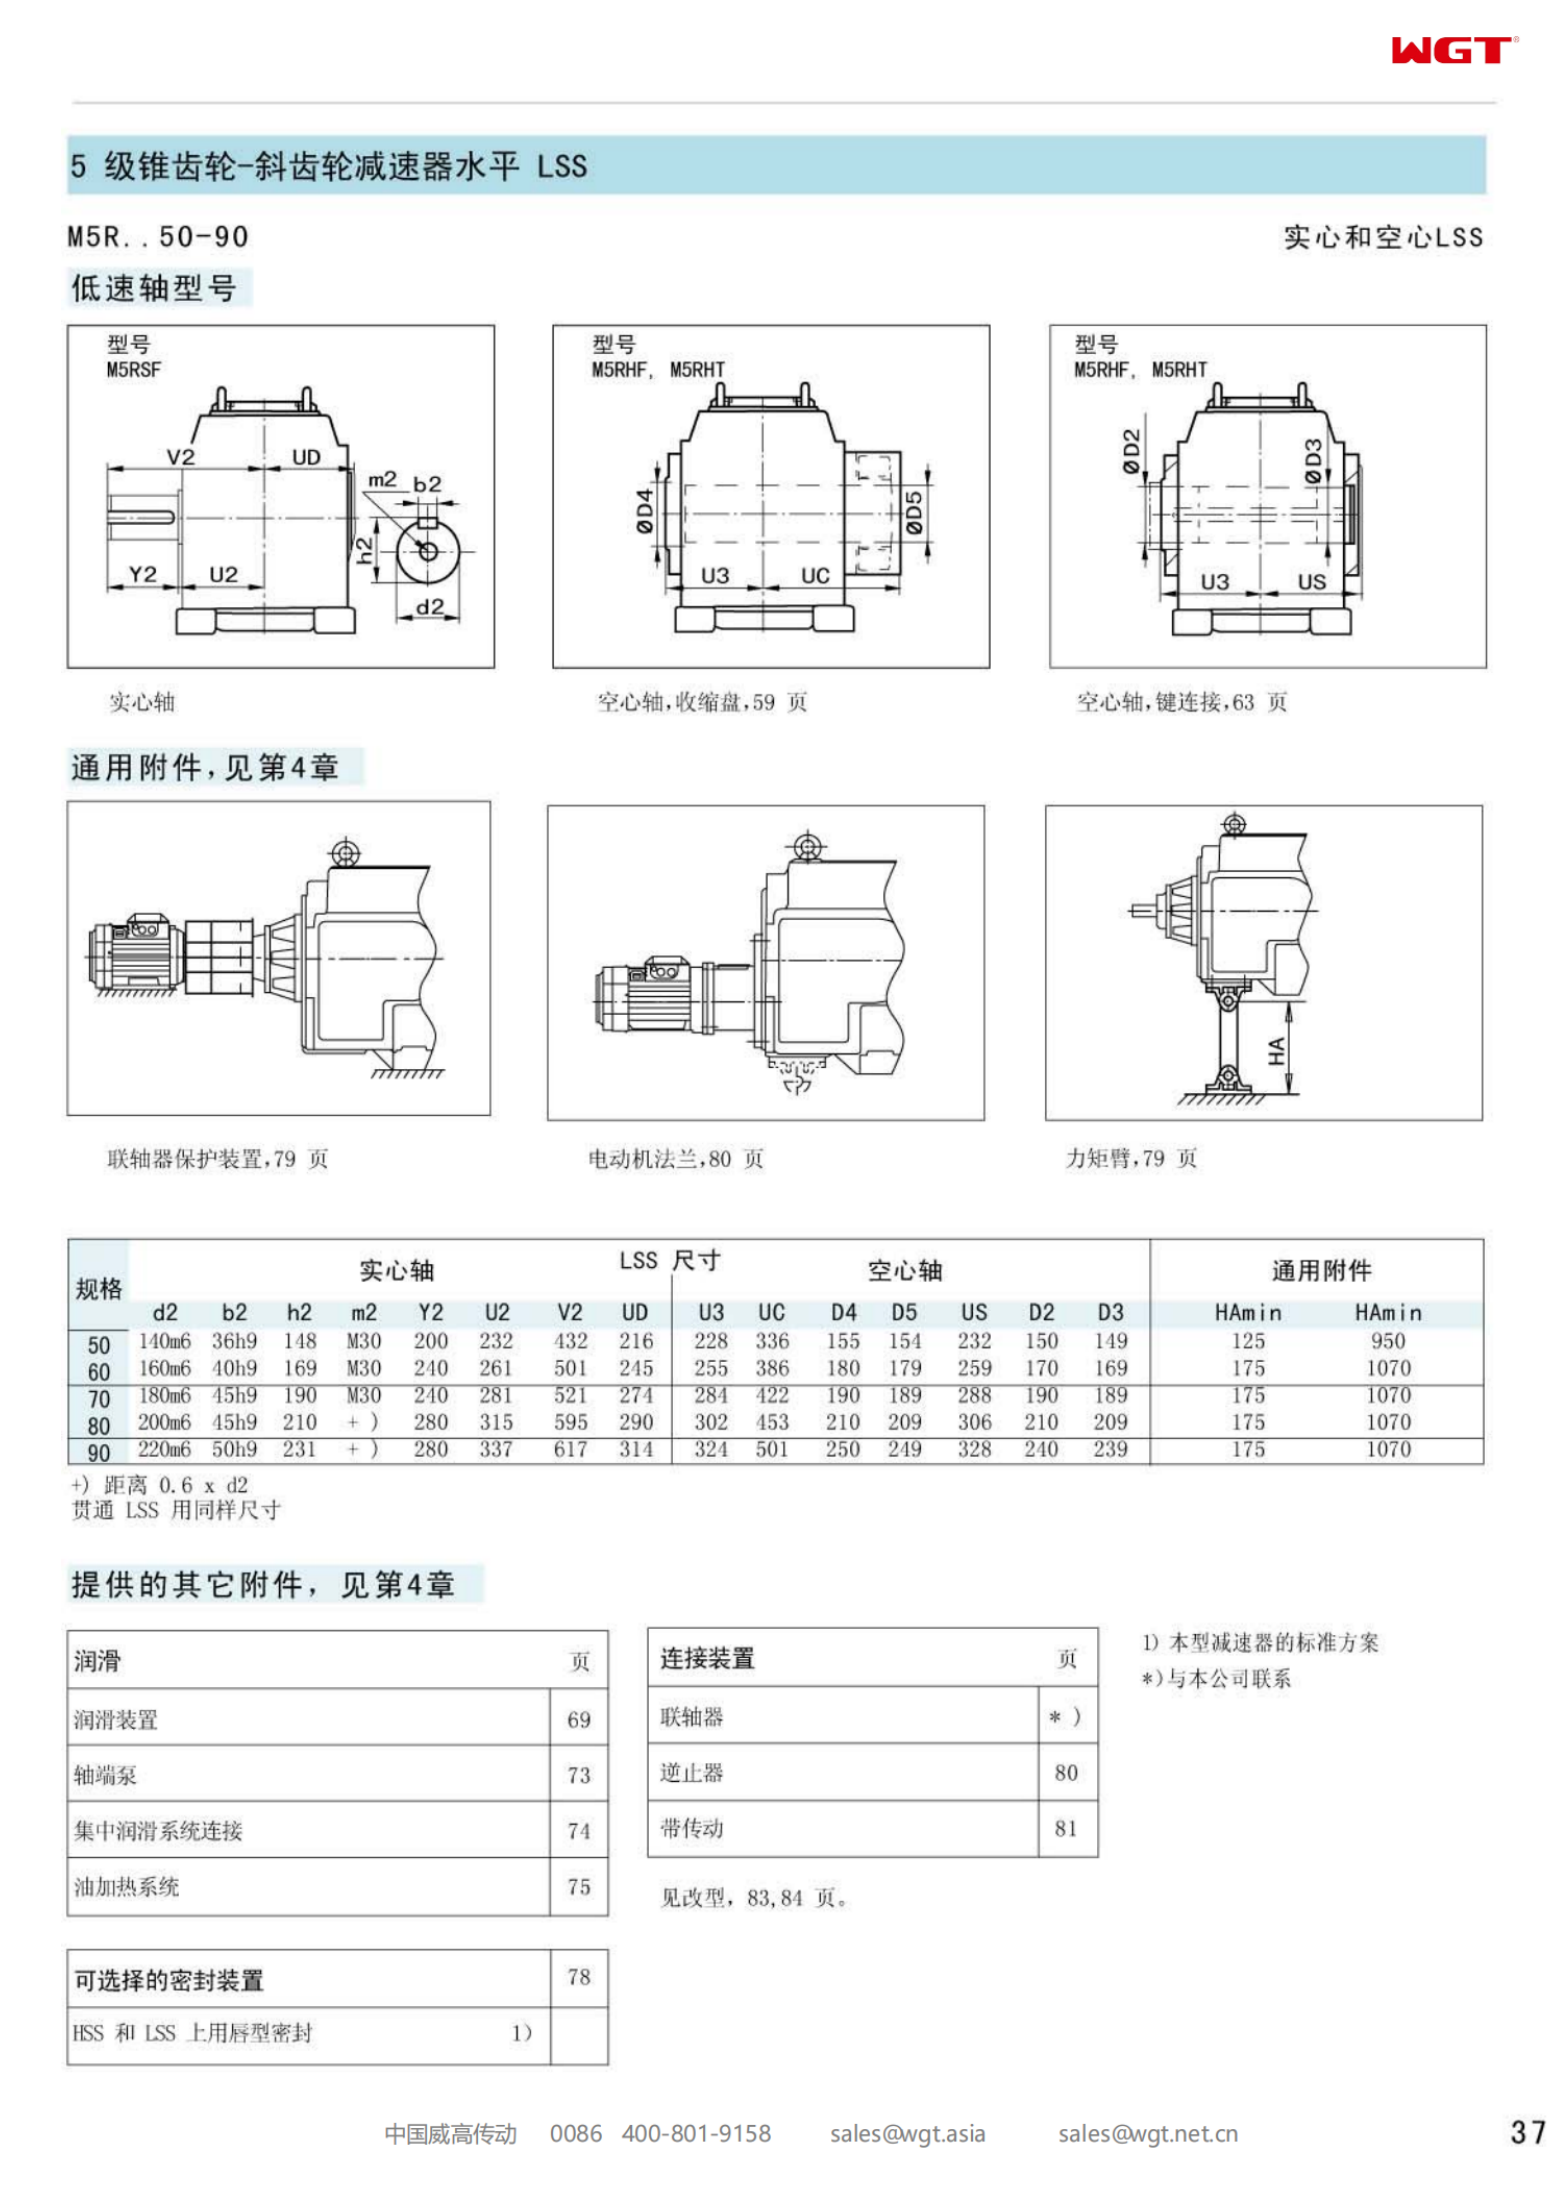 M5RSF70 Replace_SEW_M_Series Gearbox